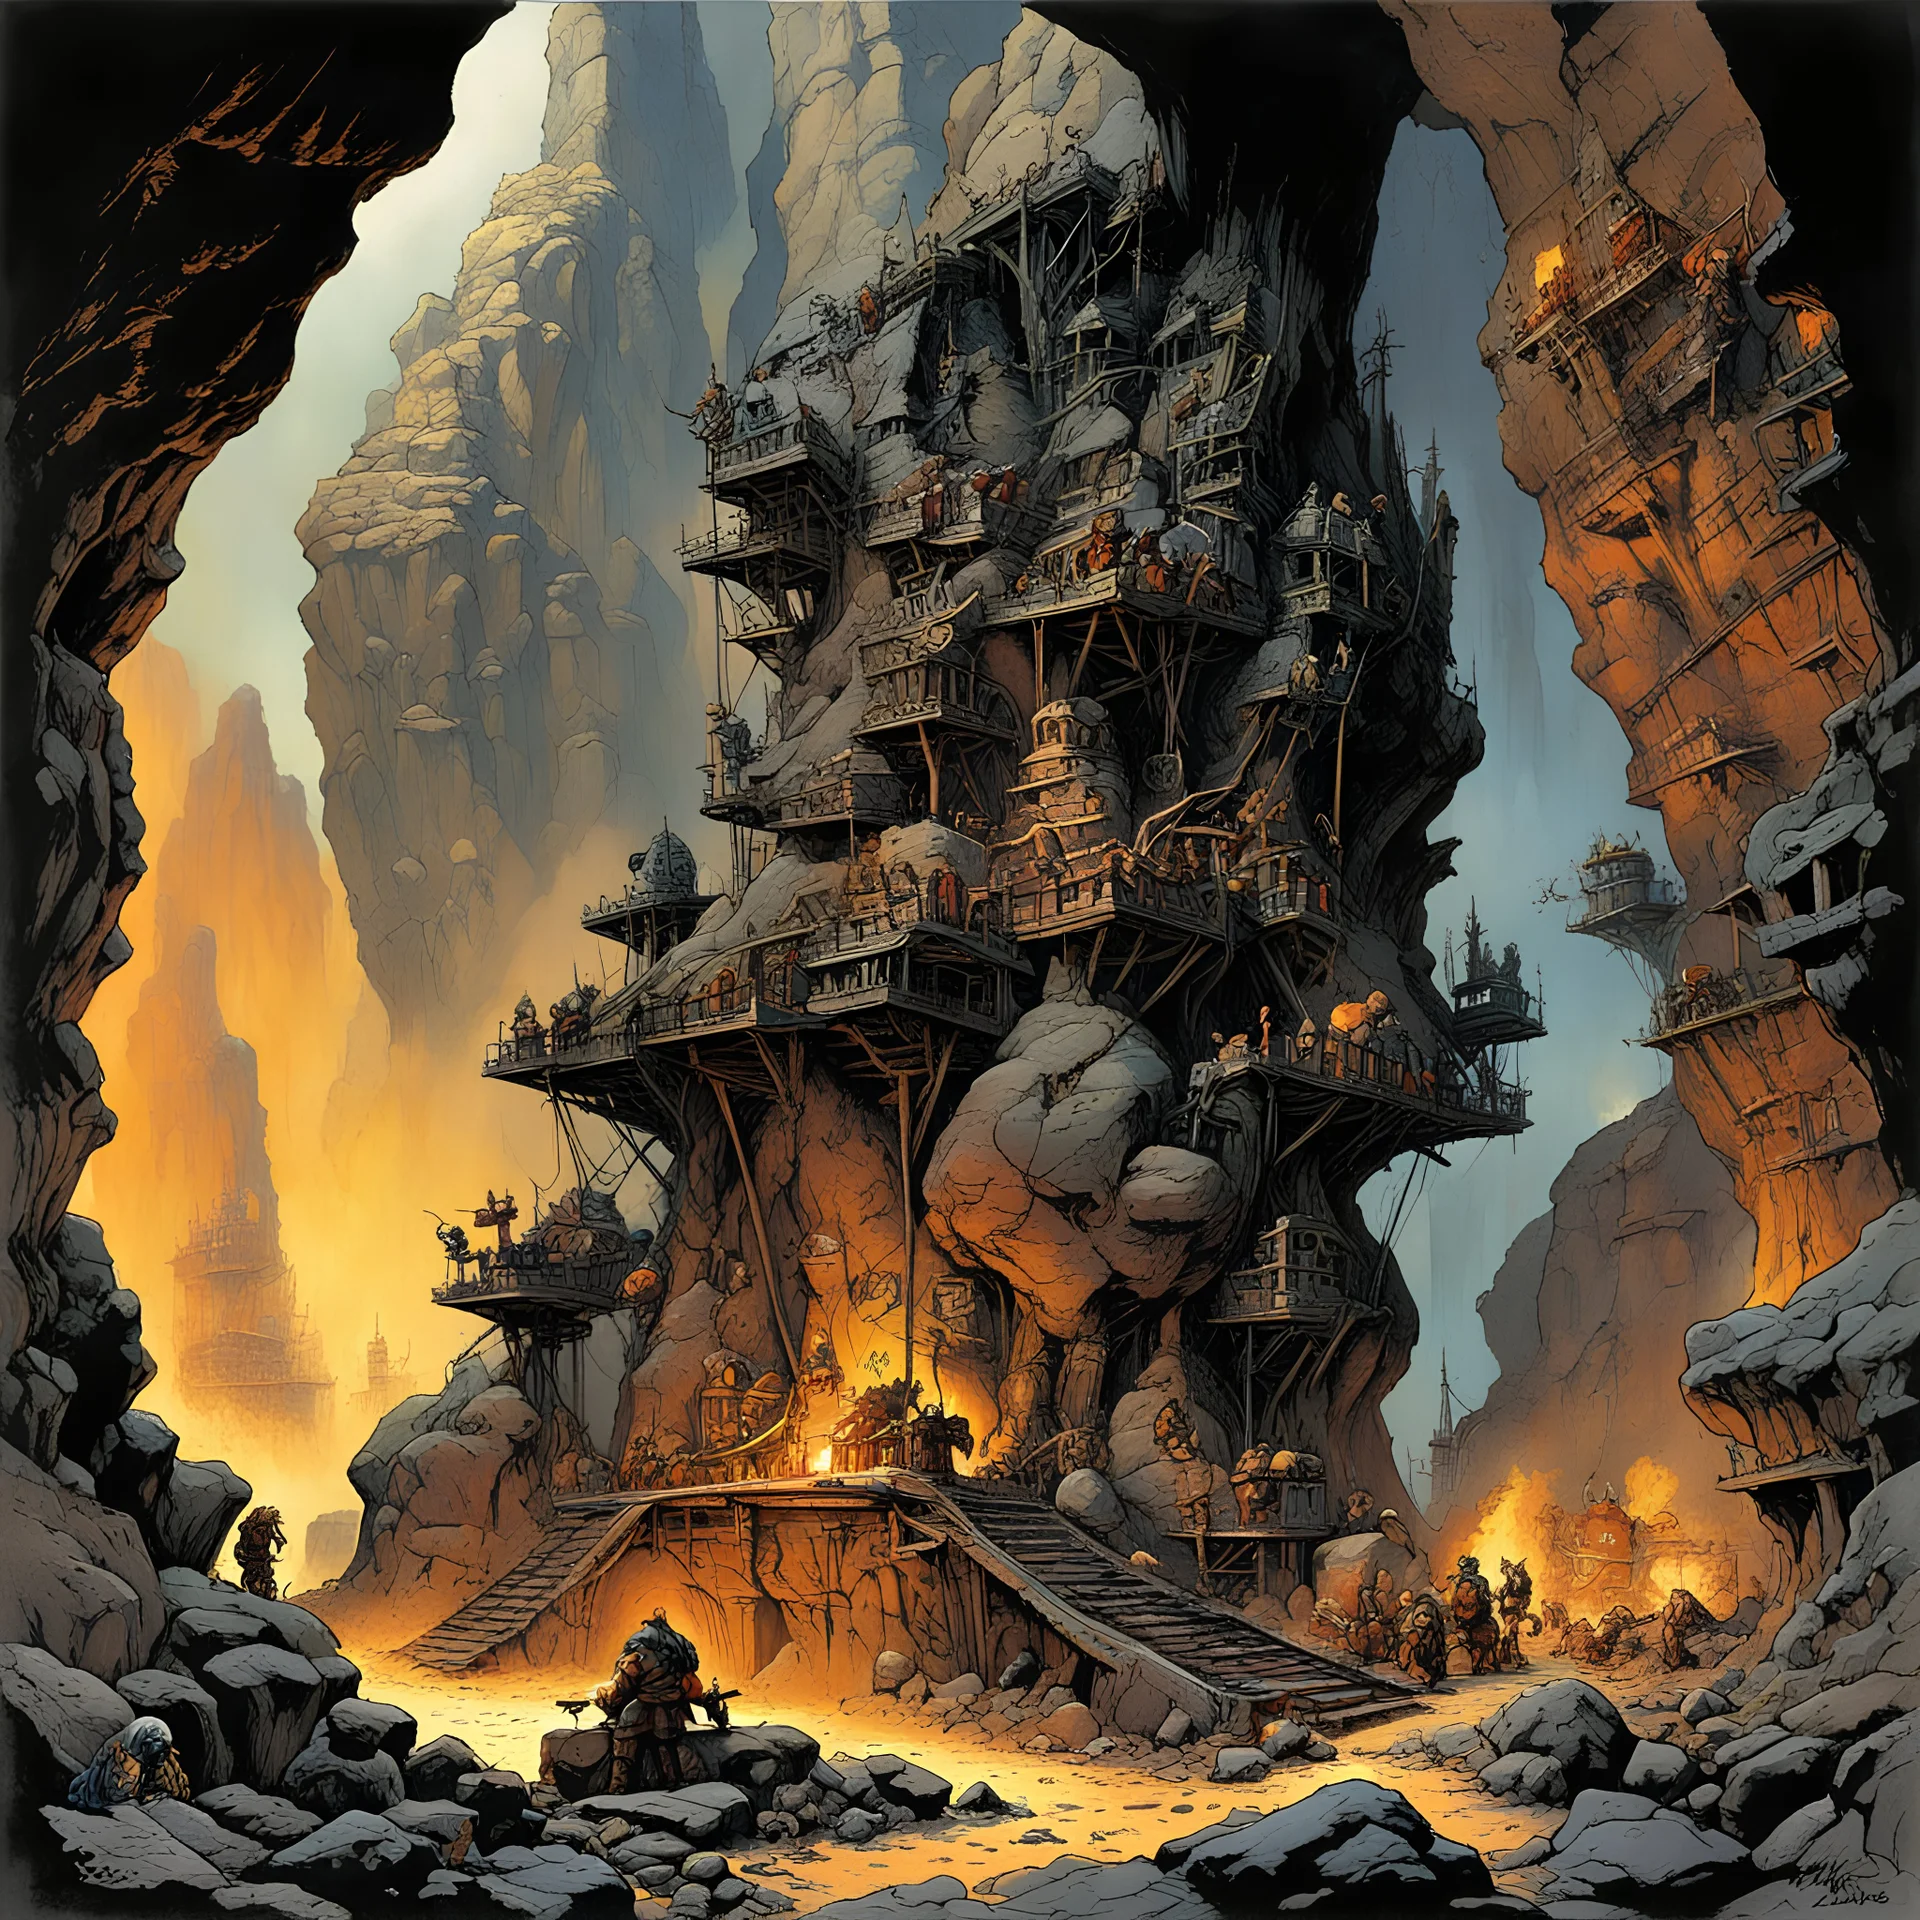 Underground Dwarf mine with massive smoking forge, blacksmiths toiling over anvils, scaffolds, dramatic maximalist stature of dwarf king carved into rock formation, by Frank Frazetta, by Boris Valejo, By Brian Bolland, fantasy, masterpiece, expansive and vast underground kingdowm, dark rich colors, detailed ink illustration, perfect coloring, smooth.